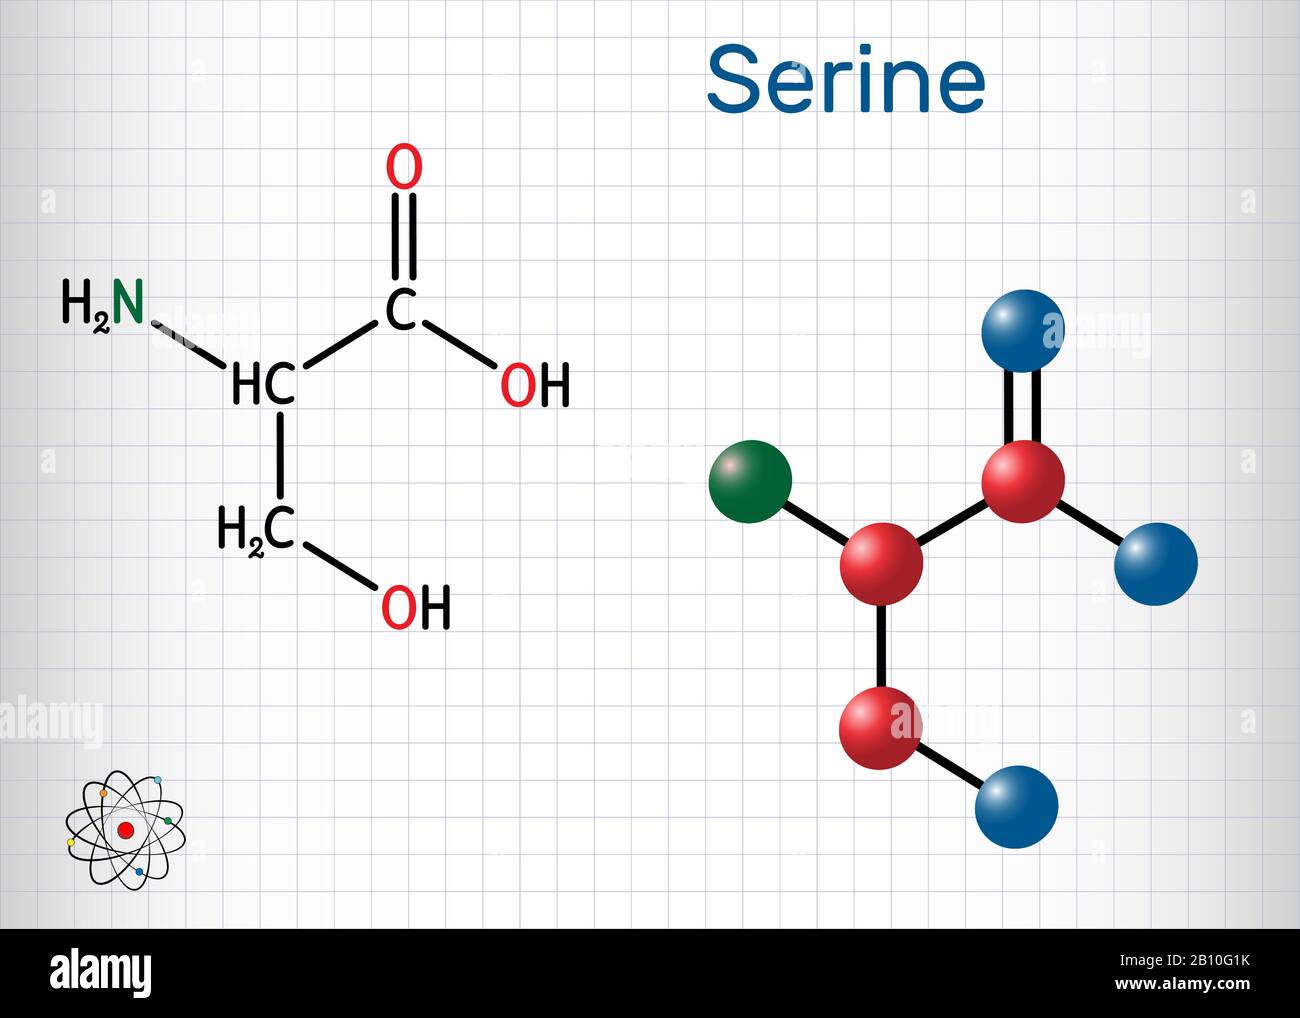 Serine, Ser amino acid molecule. It is used in the biosynthesis of protein. Structural chemical formula and molecule model. Sheet of paper in a cage. Stock Vector